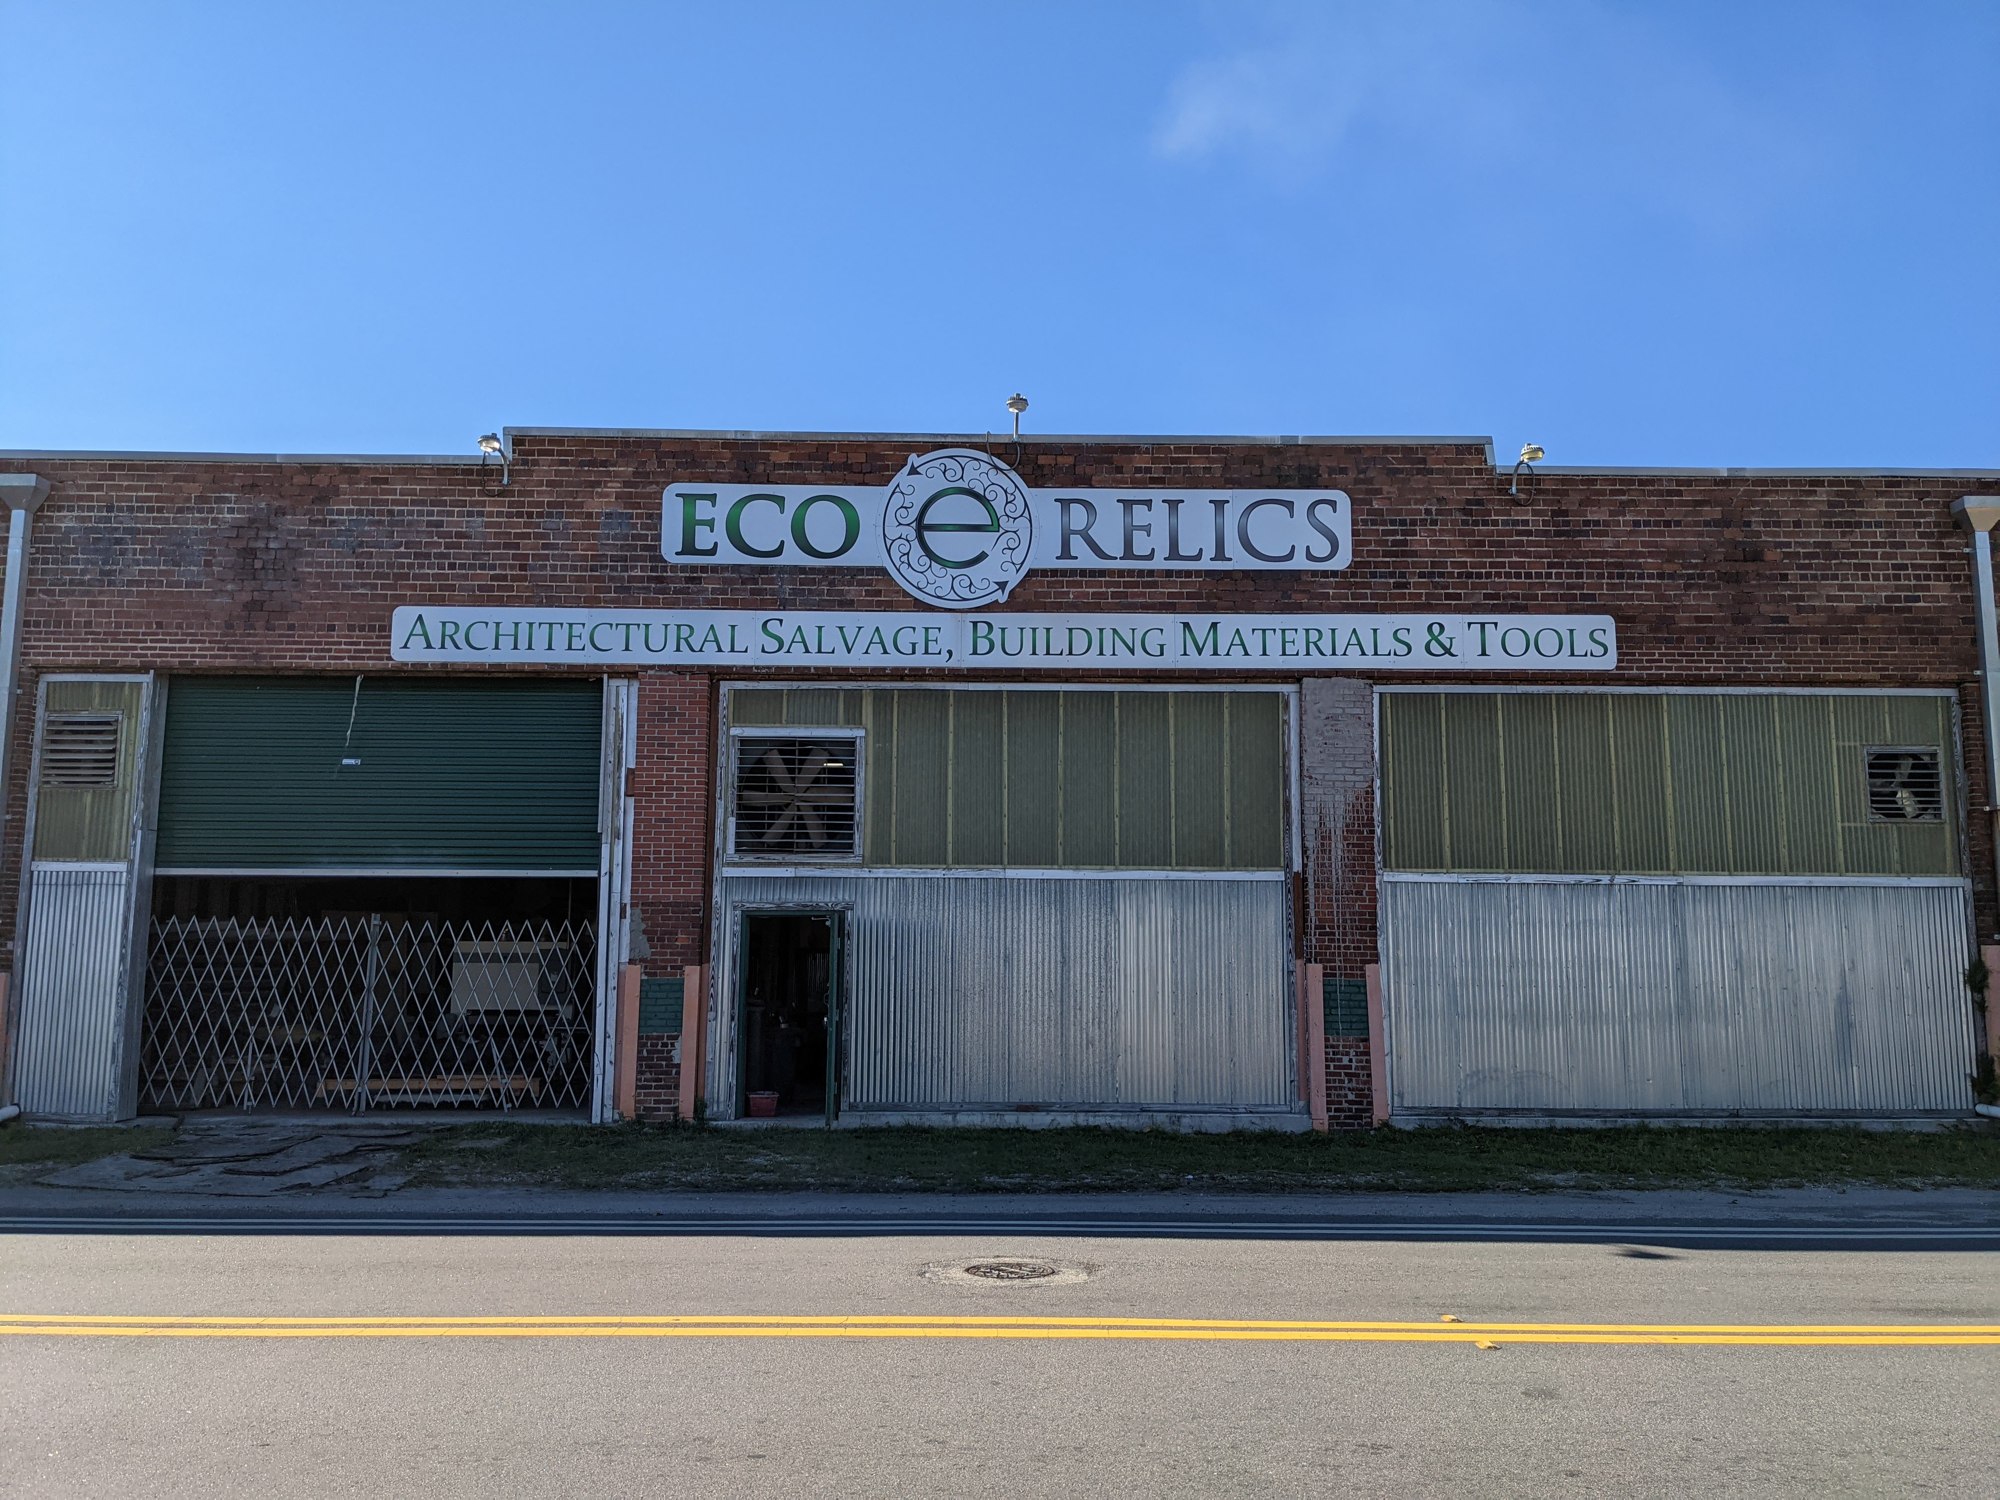 Eco Relics is in the Rail Yard District about 1½ miles west of Brooklyn.